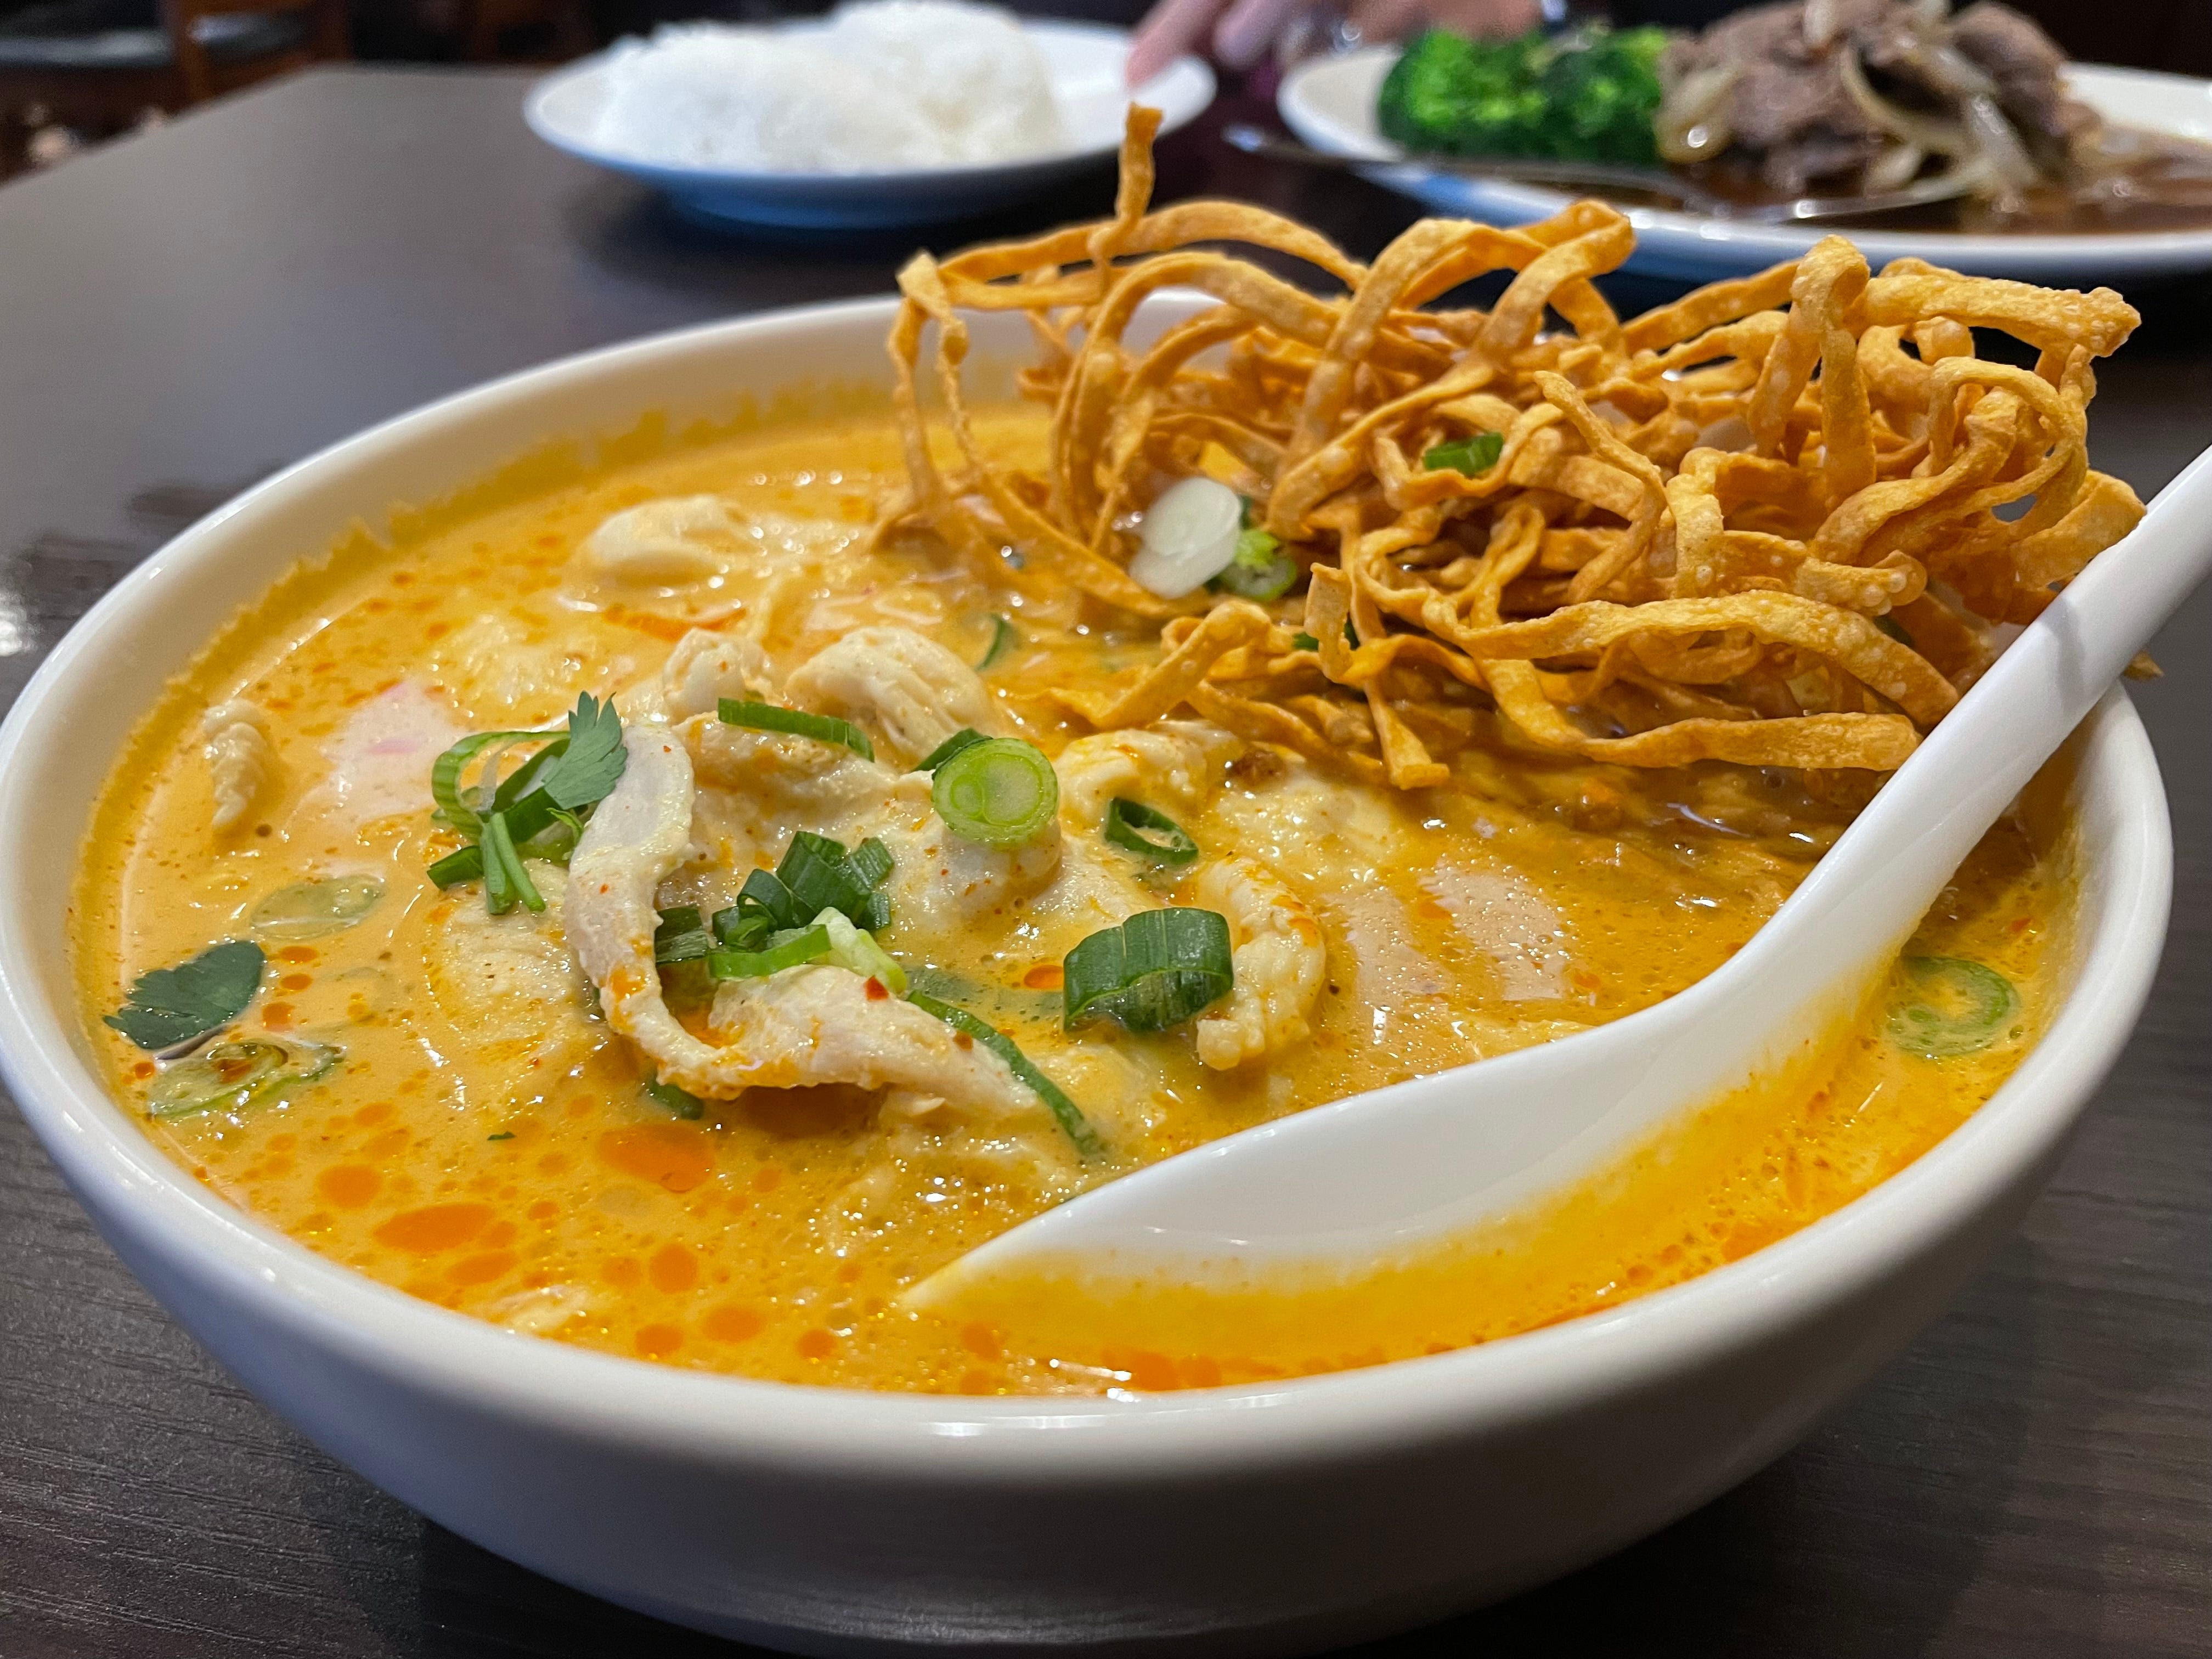 Find the best Asian food in Knoxville at these Japanese, Chinese, Indian, Korean restaurants